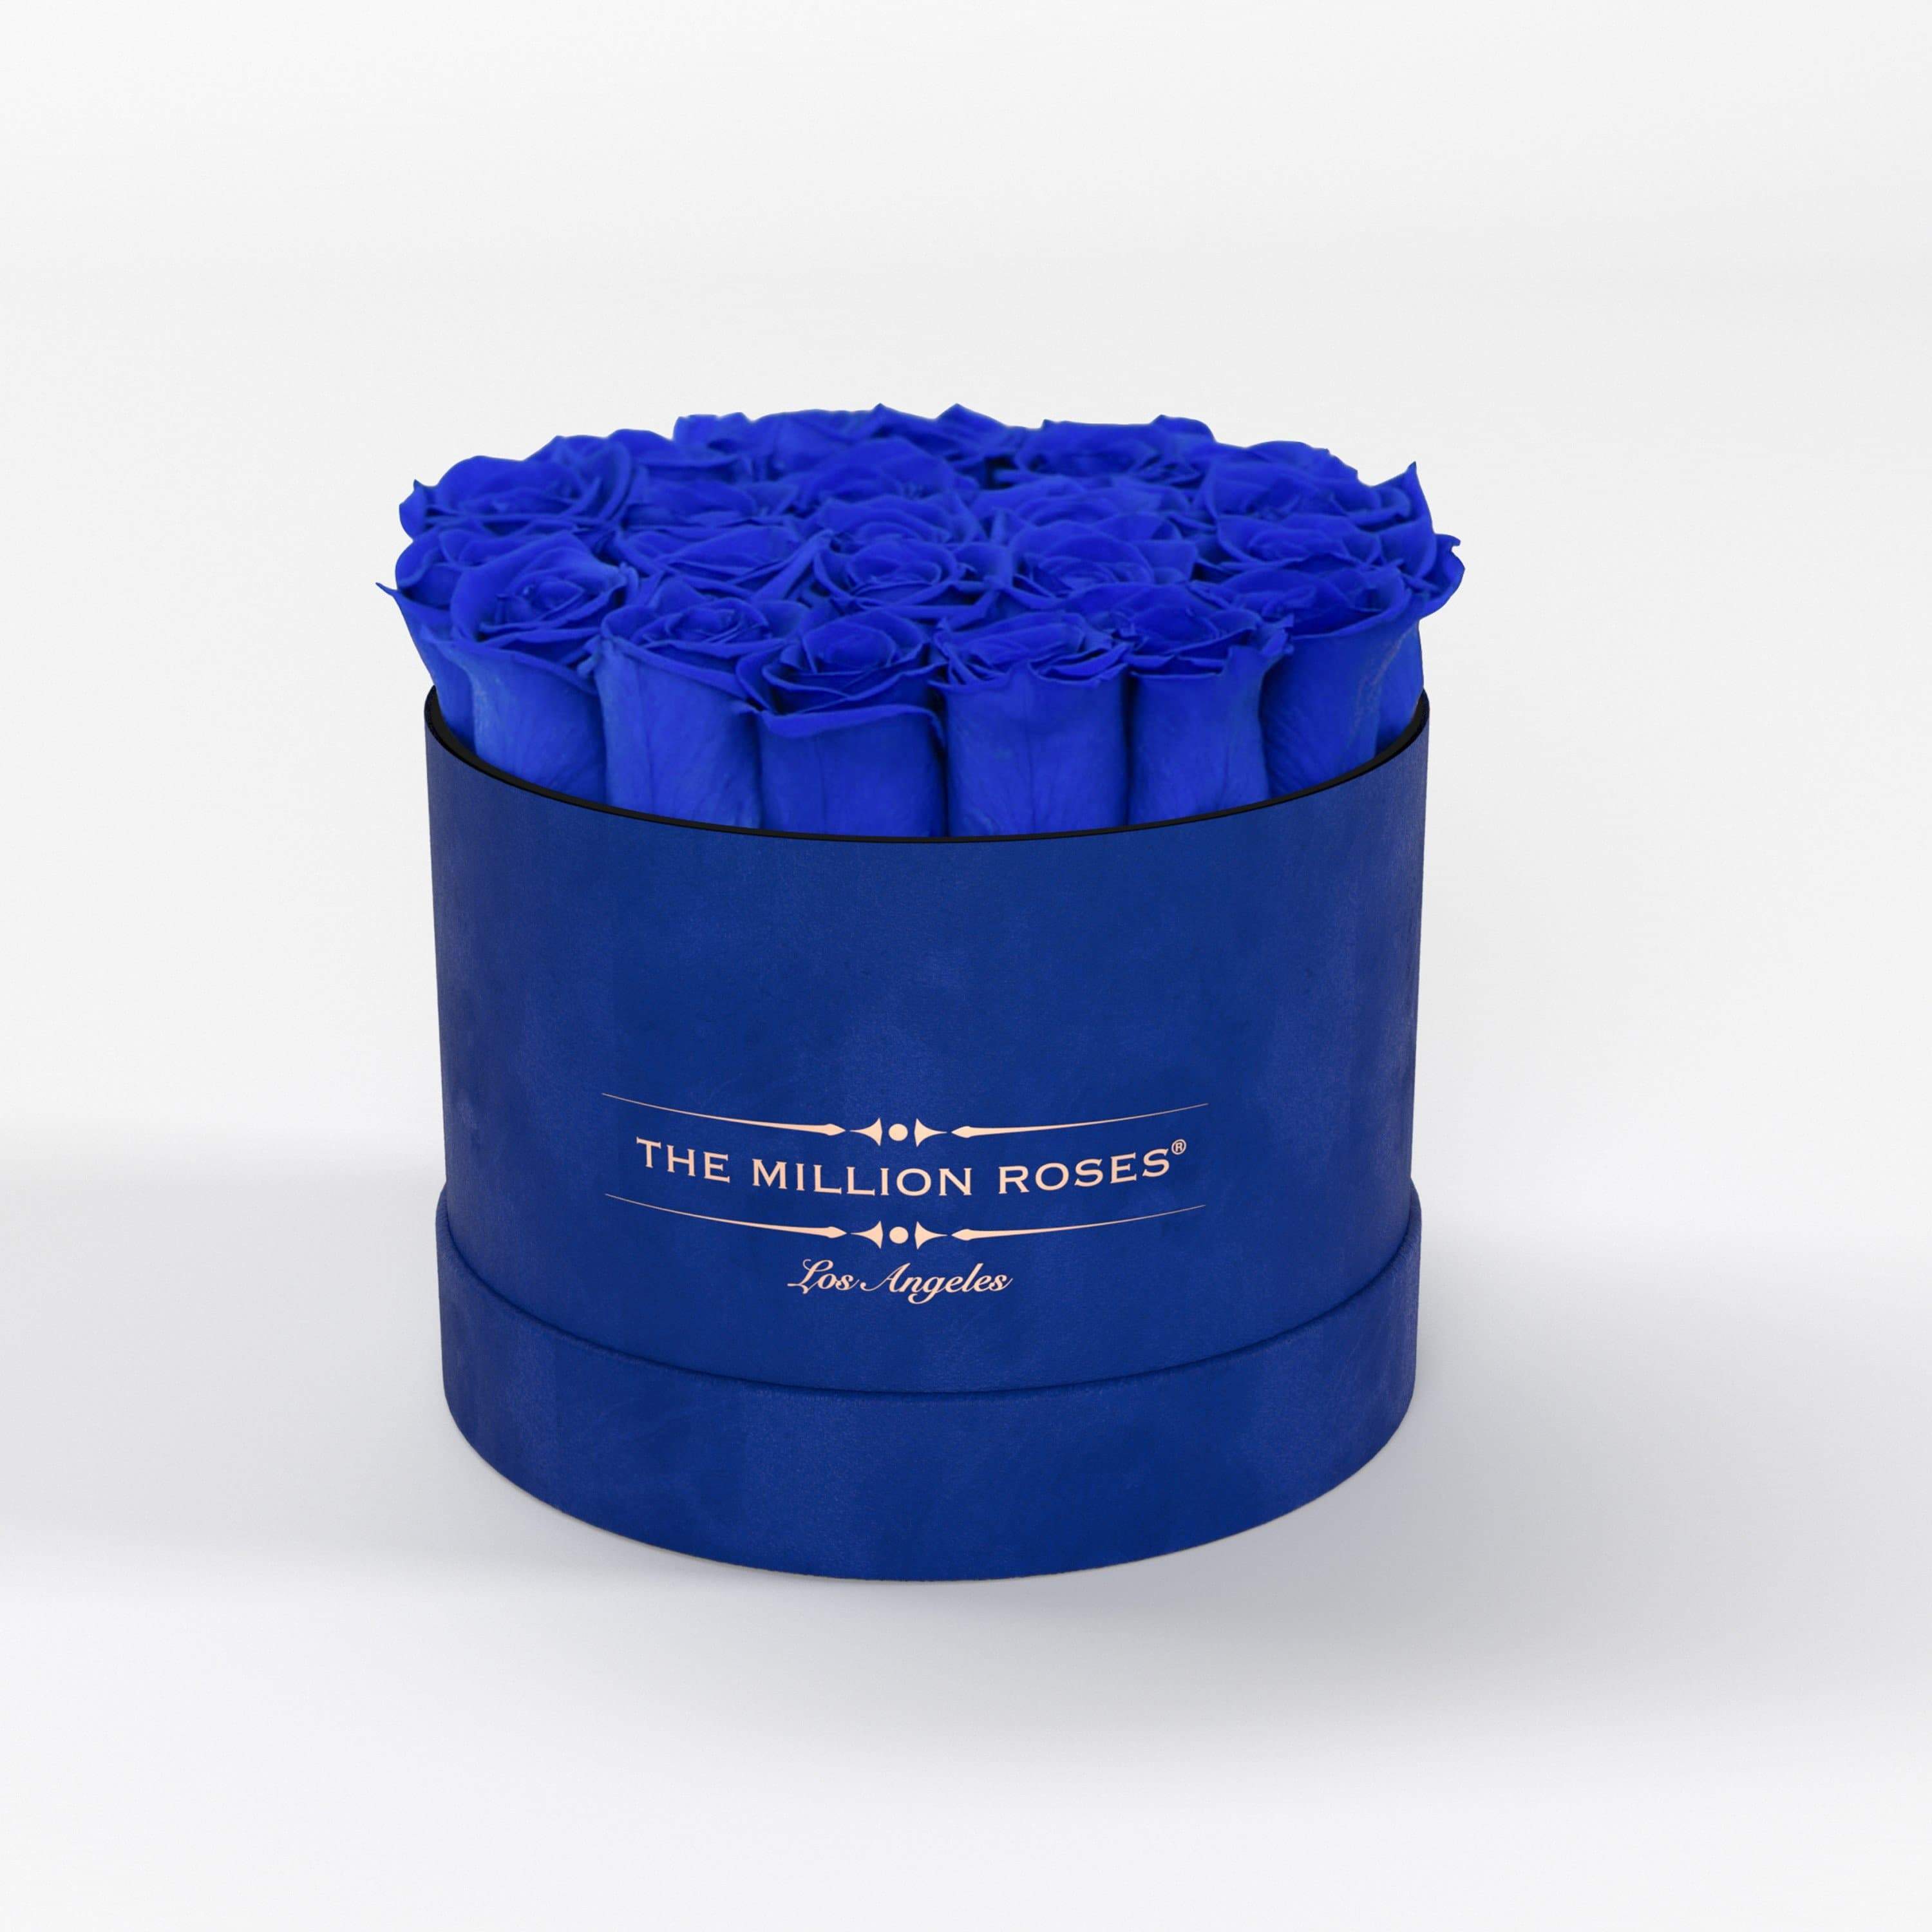 Classic Royal Blue Suede Box | All Colors - The Million Roses